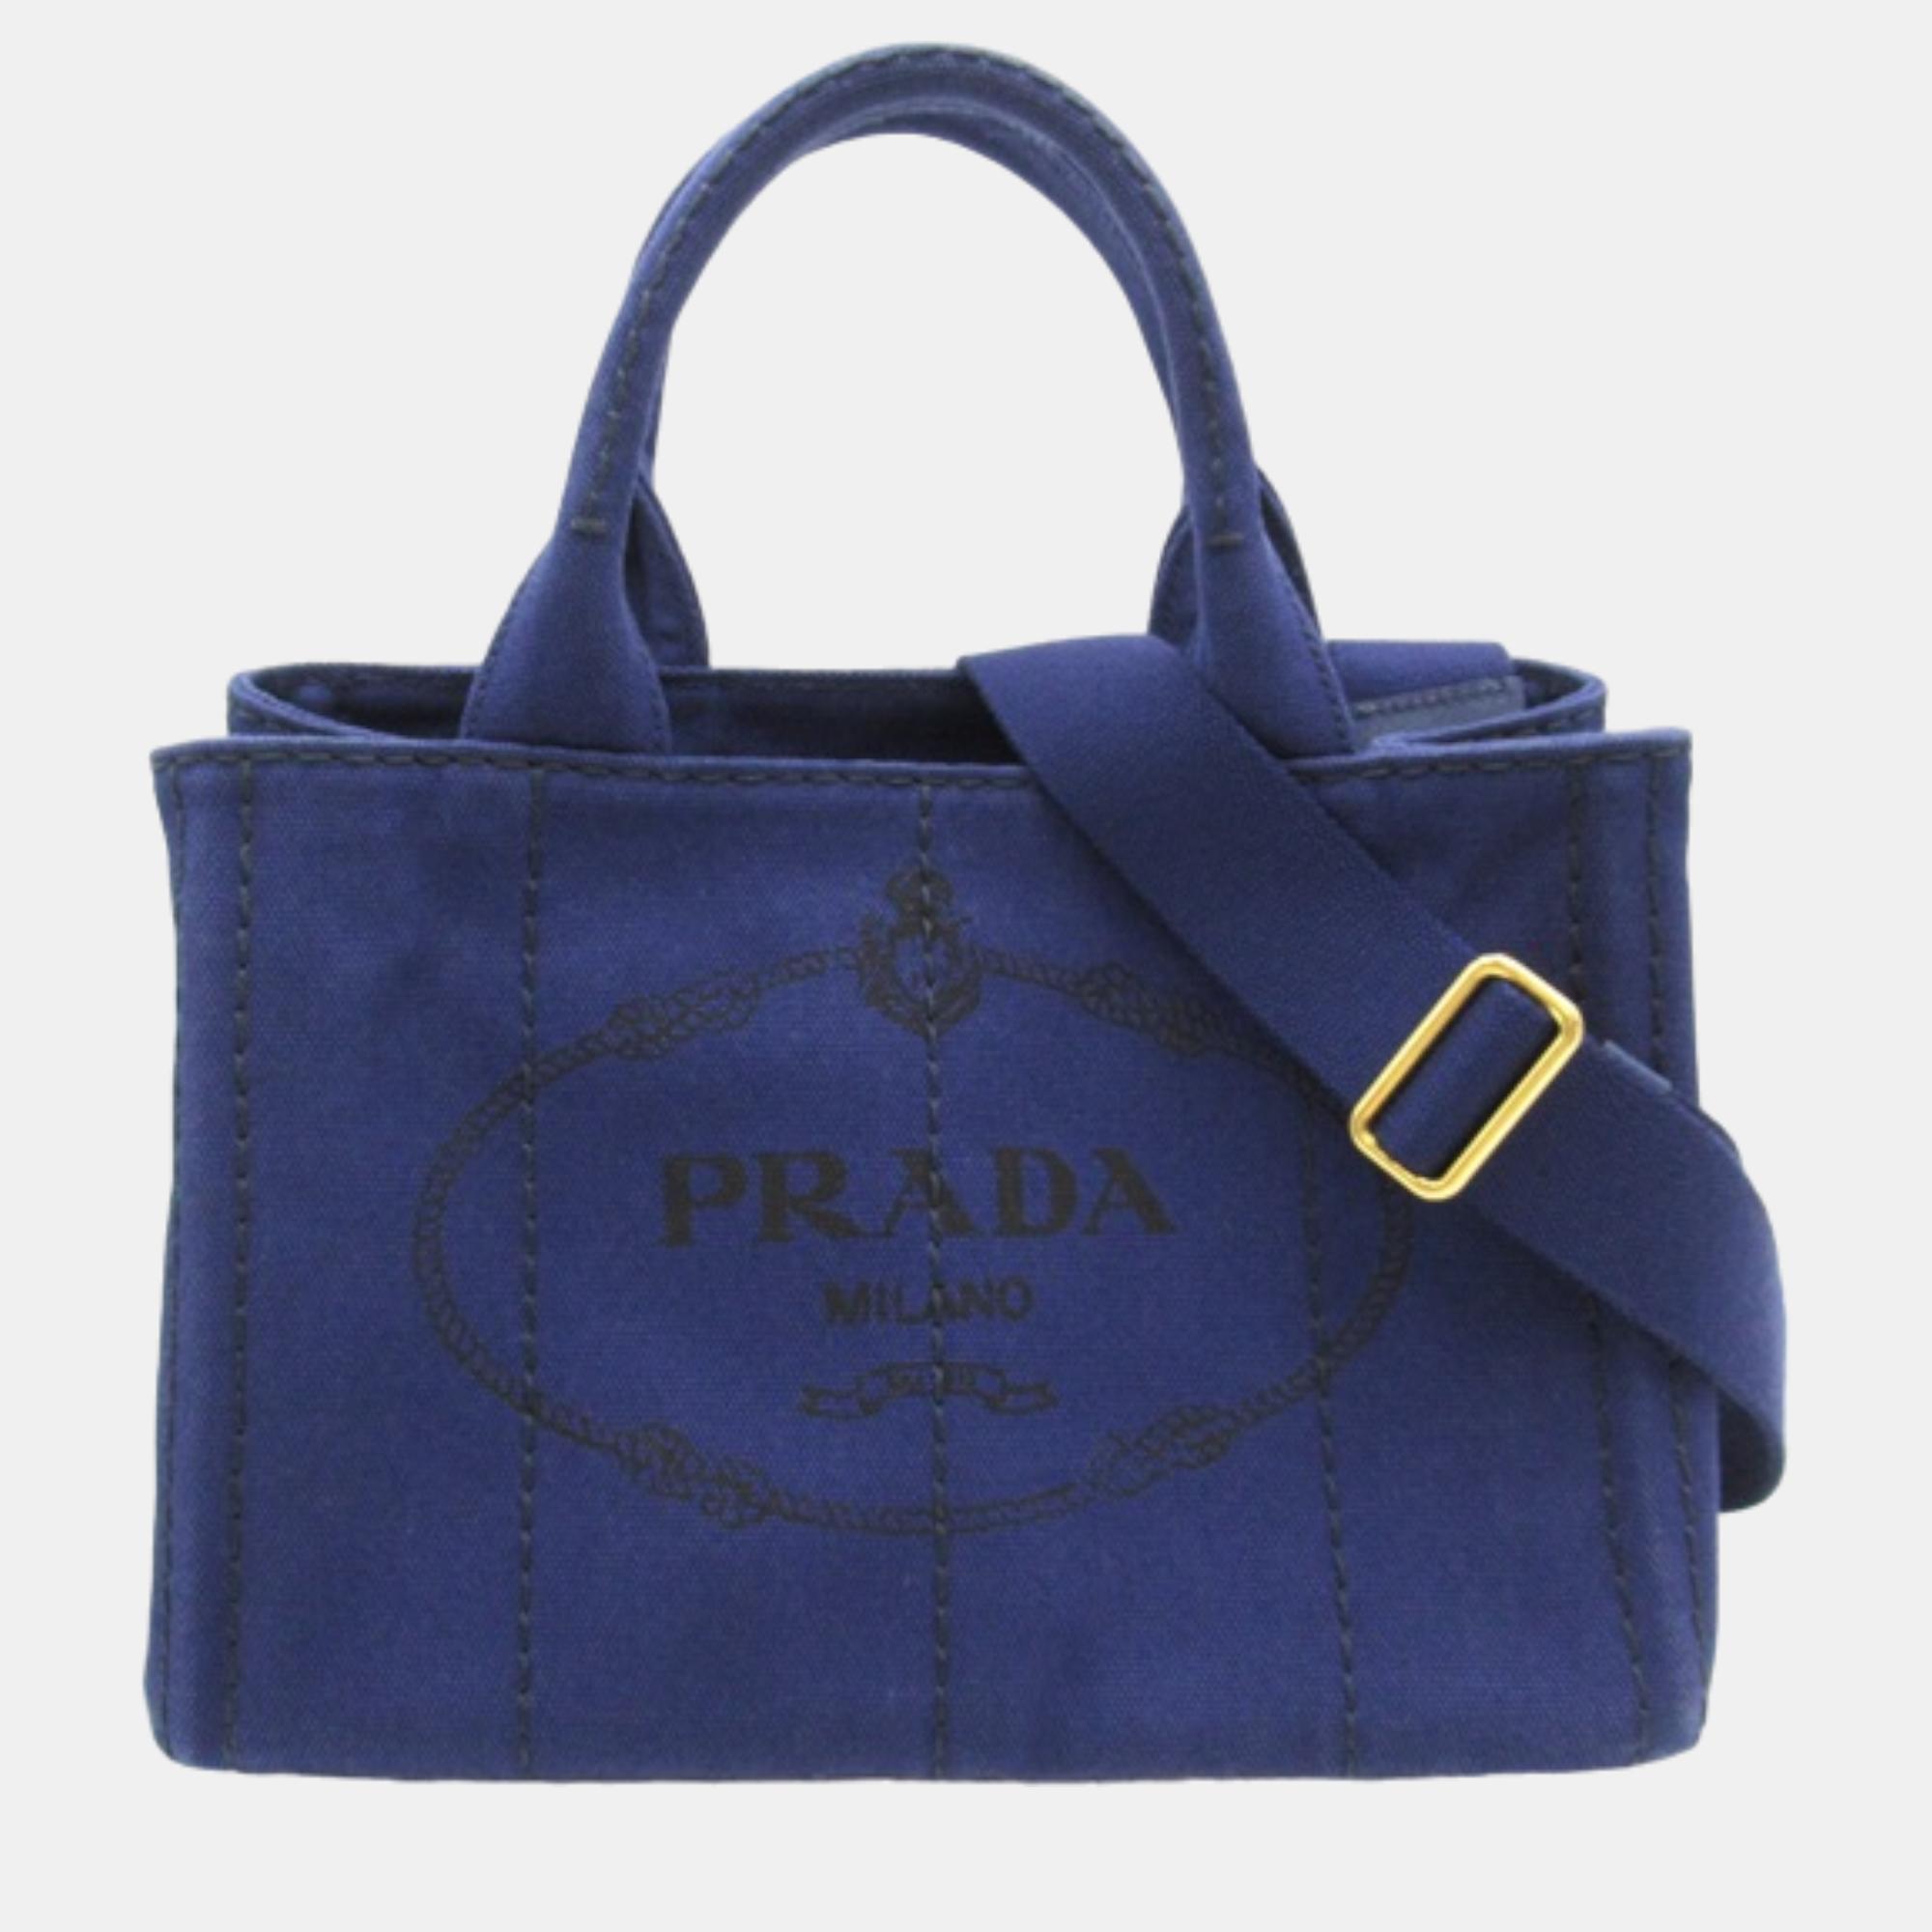 Thoughtful details high quality and enduring appeal mark this designer bag. The bag is sewn with skill to deliver a refined look and an impeccable finish.